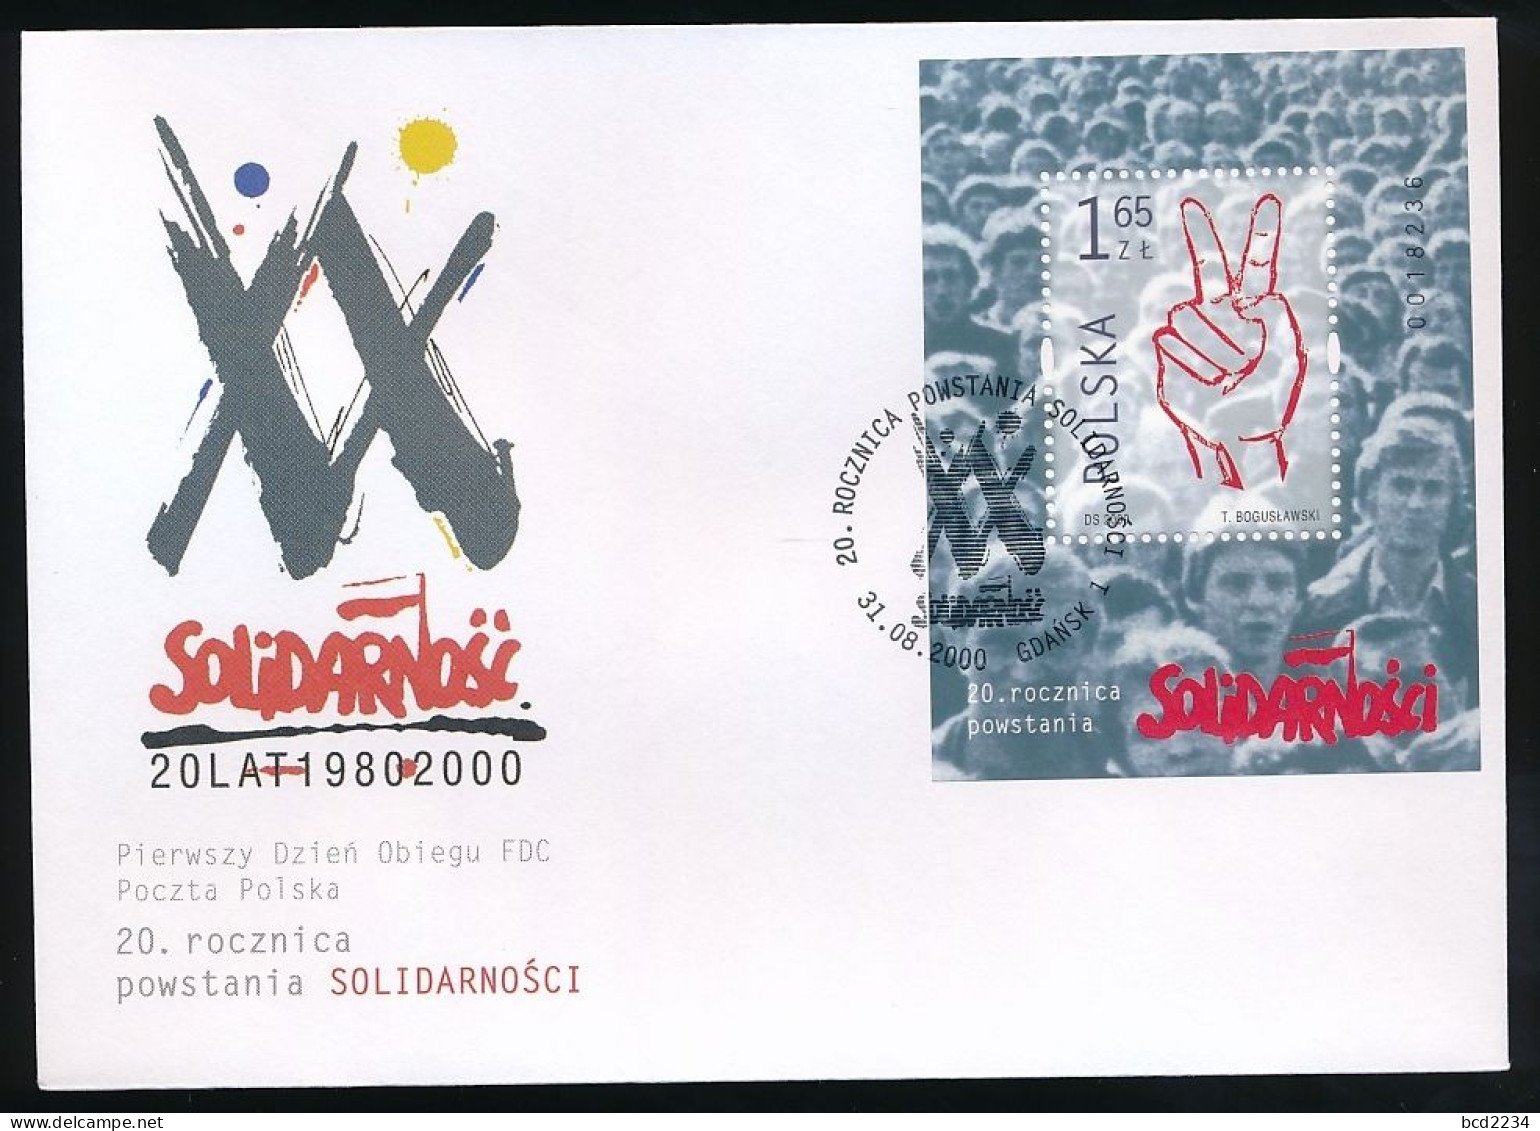 POLAND FDC 2000 SOLIDARITY SOLIDARNOSC 20TH ANNIV OF THE TRADE UNION MS V FOR VICTORY SIGN 2 FINGERS GDANSK DANZIG - Lettres & Documents